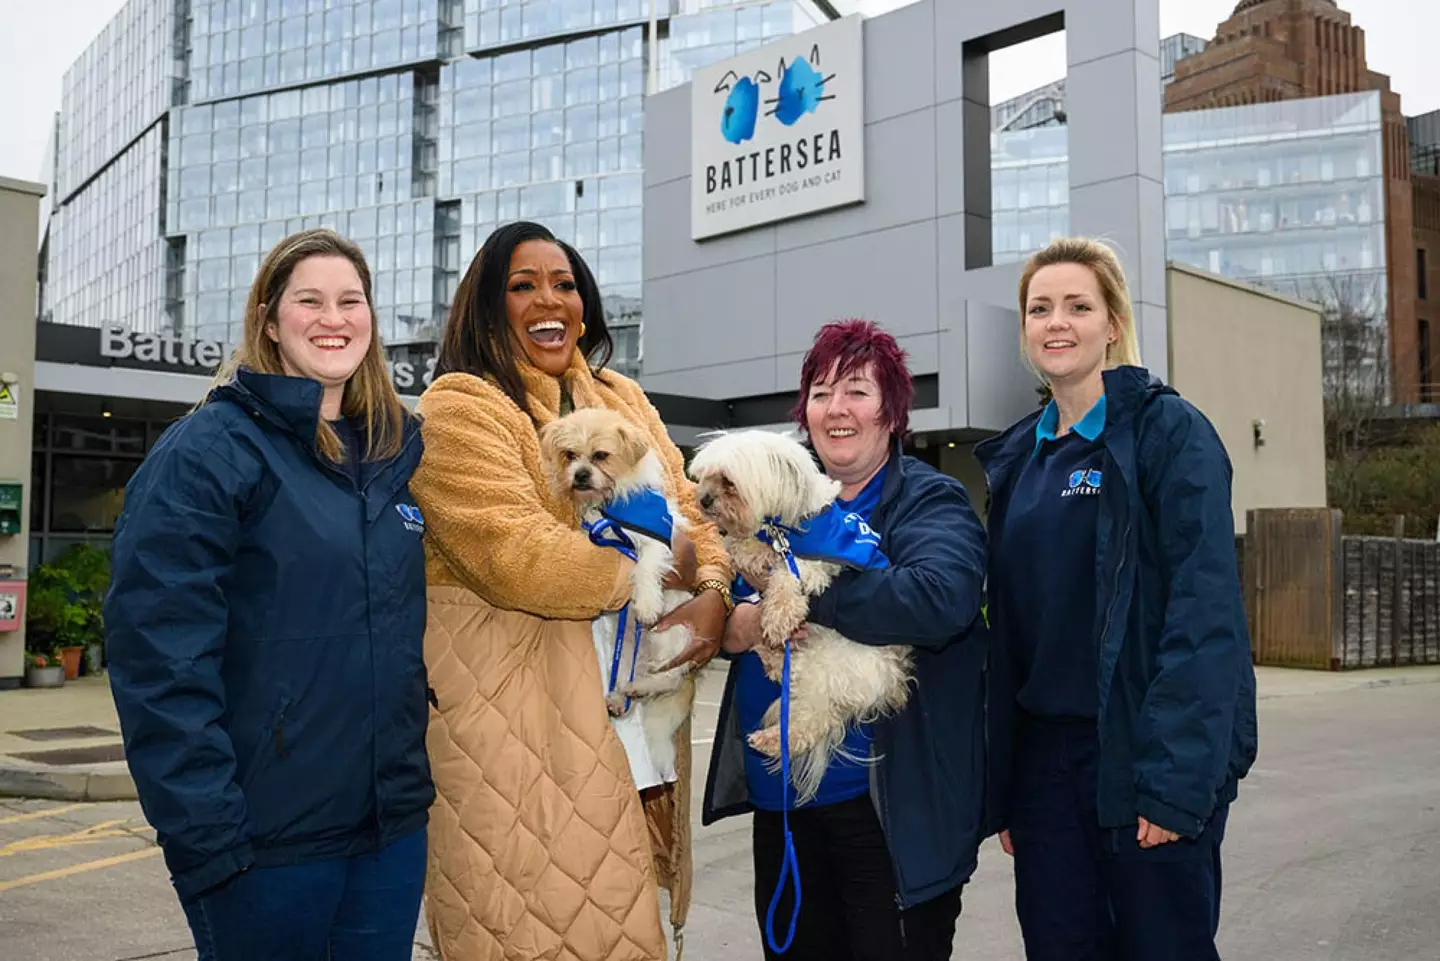 This Morning's Alison Hammond has just been announced as the new presenter of For The Love of Dogs.